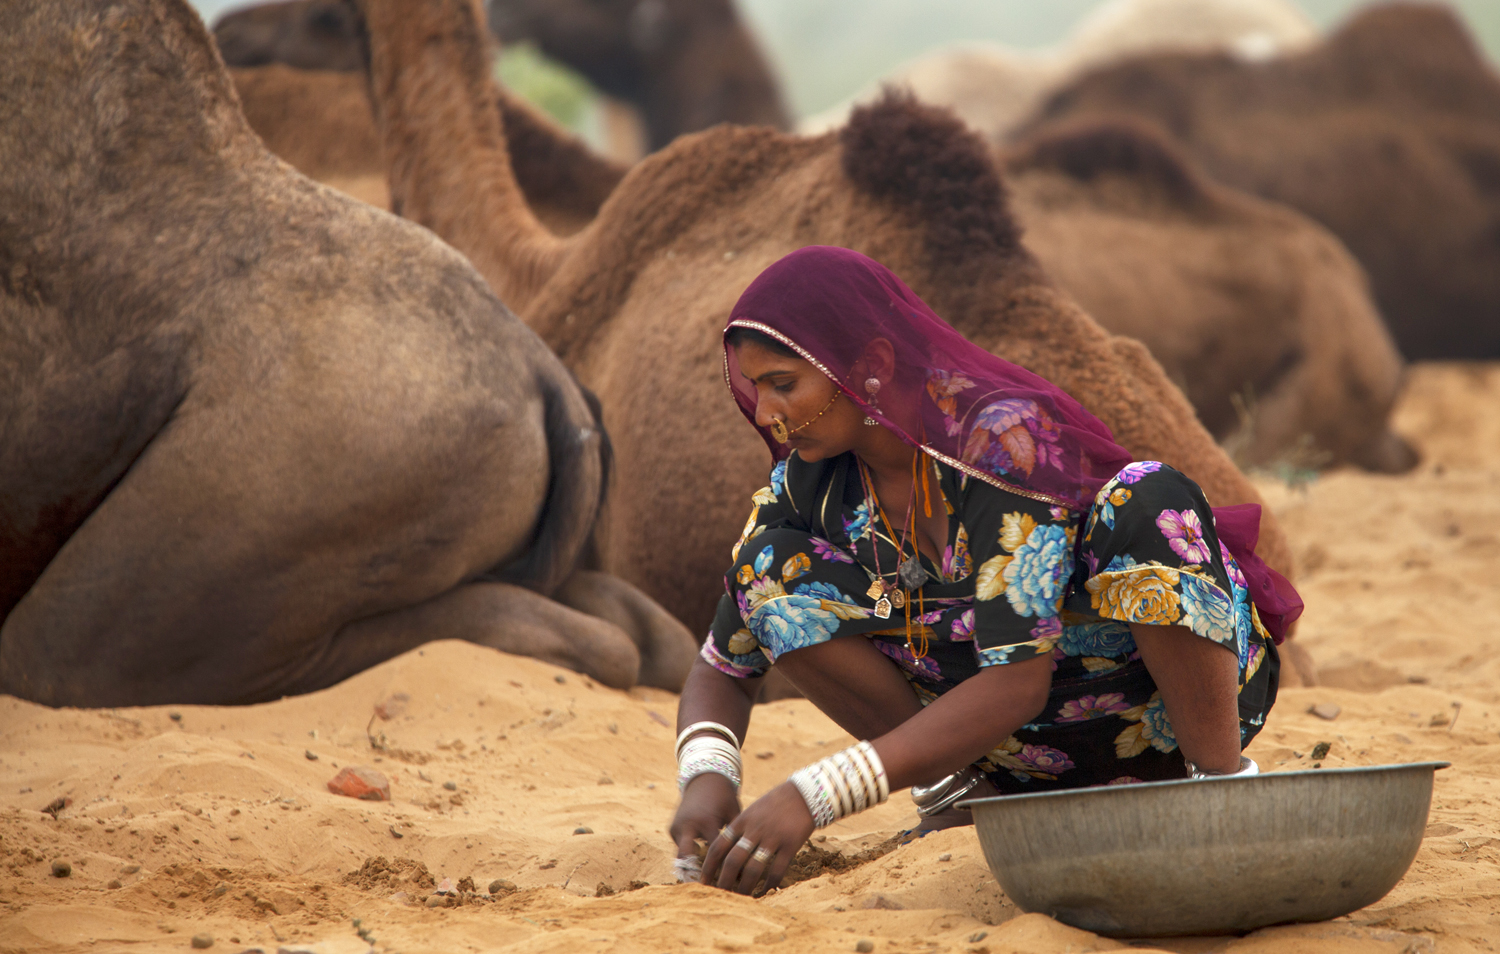 Thar Desert villagers use camels to lift water from deep wells. In some parts, camel dung is mixed with grain and used as fertilizer. Here a lady is seen collecting dung from camels.